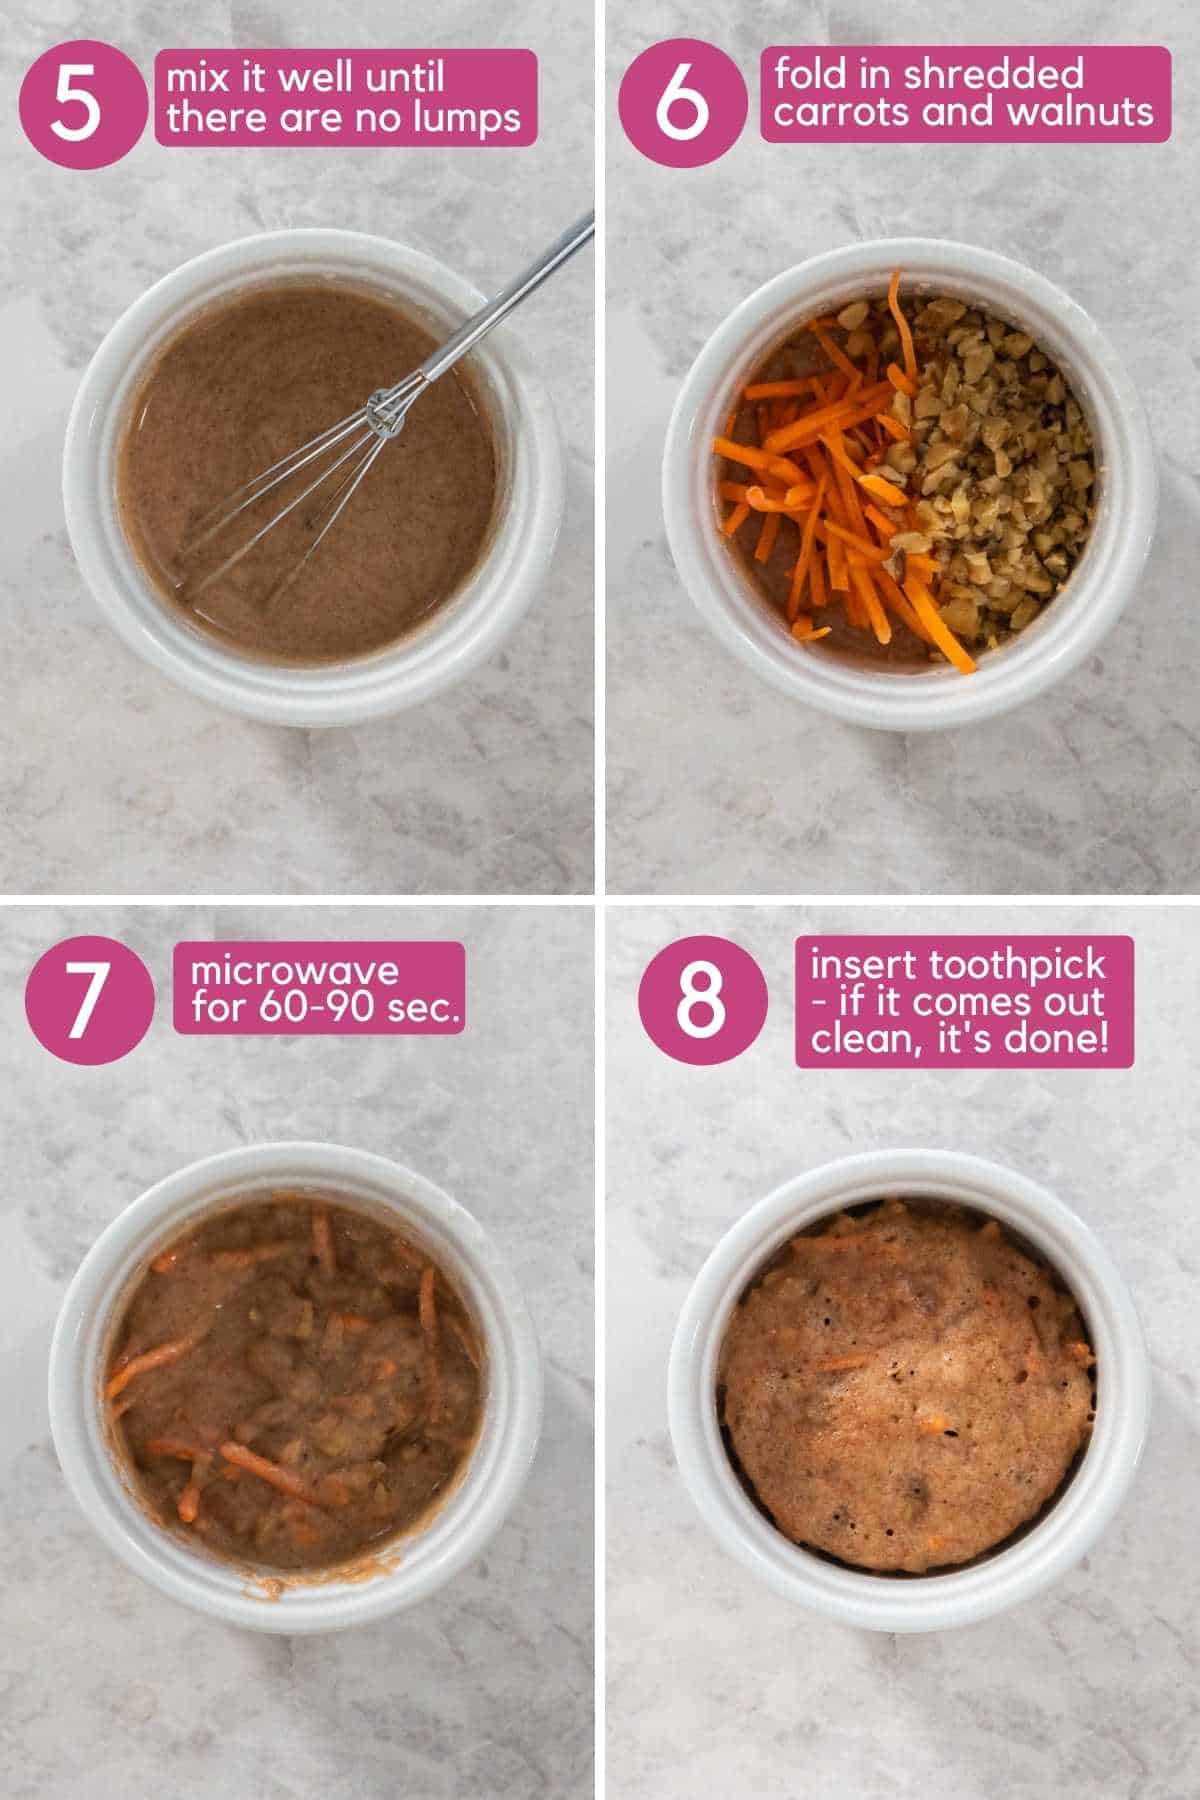 Adding the carrots and walnuts to your mug to make a single serve dessert.